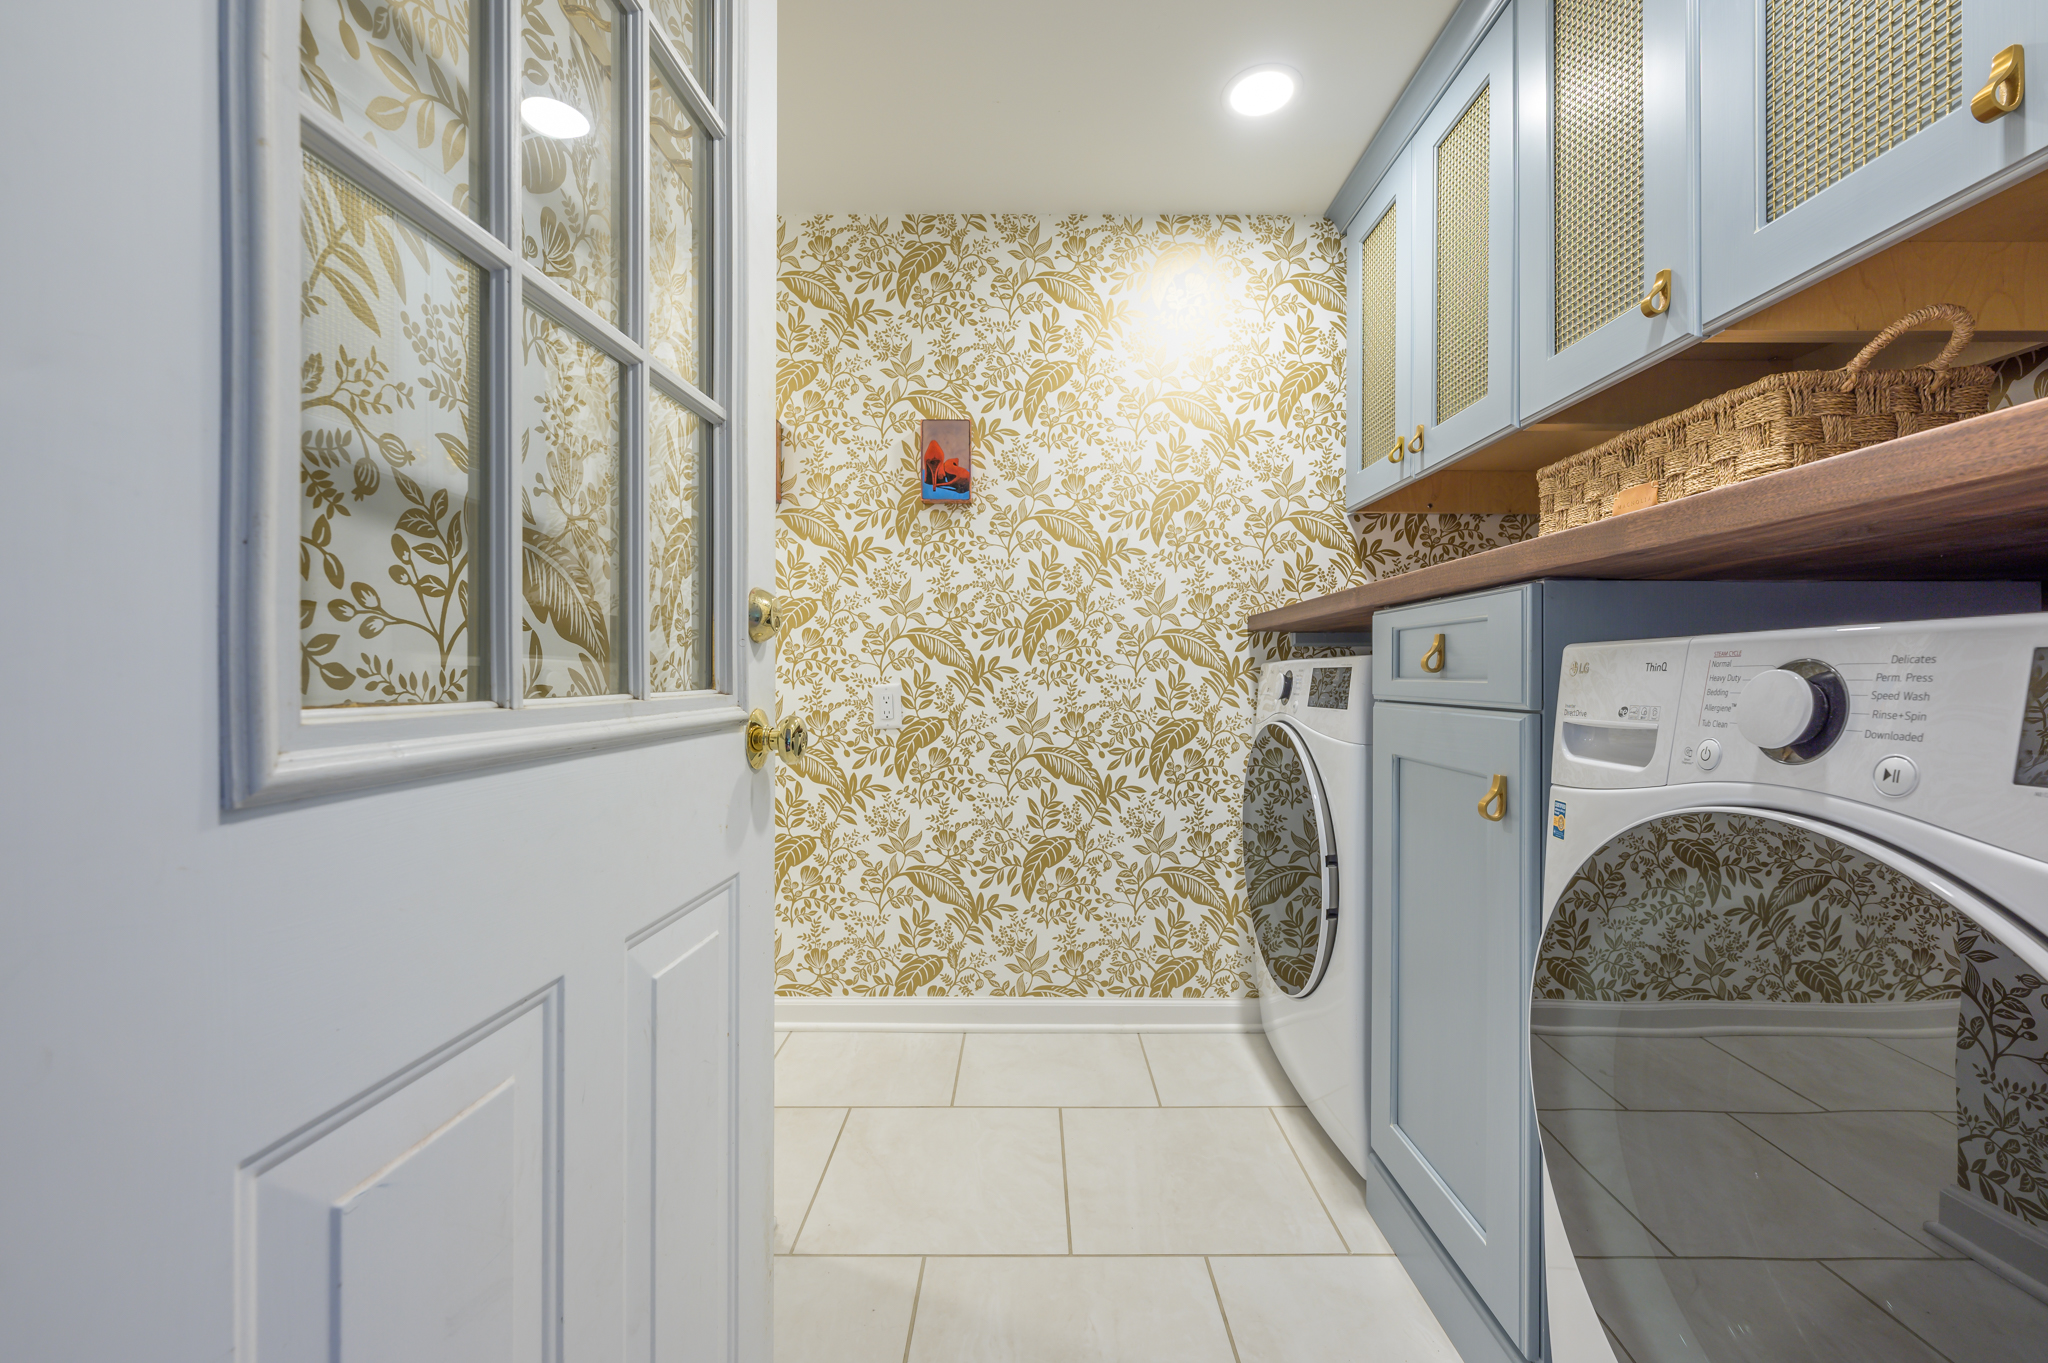 paisley and leaf pattern that is gold and white on walls in laundry room